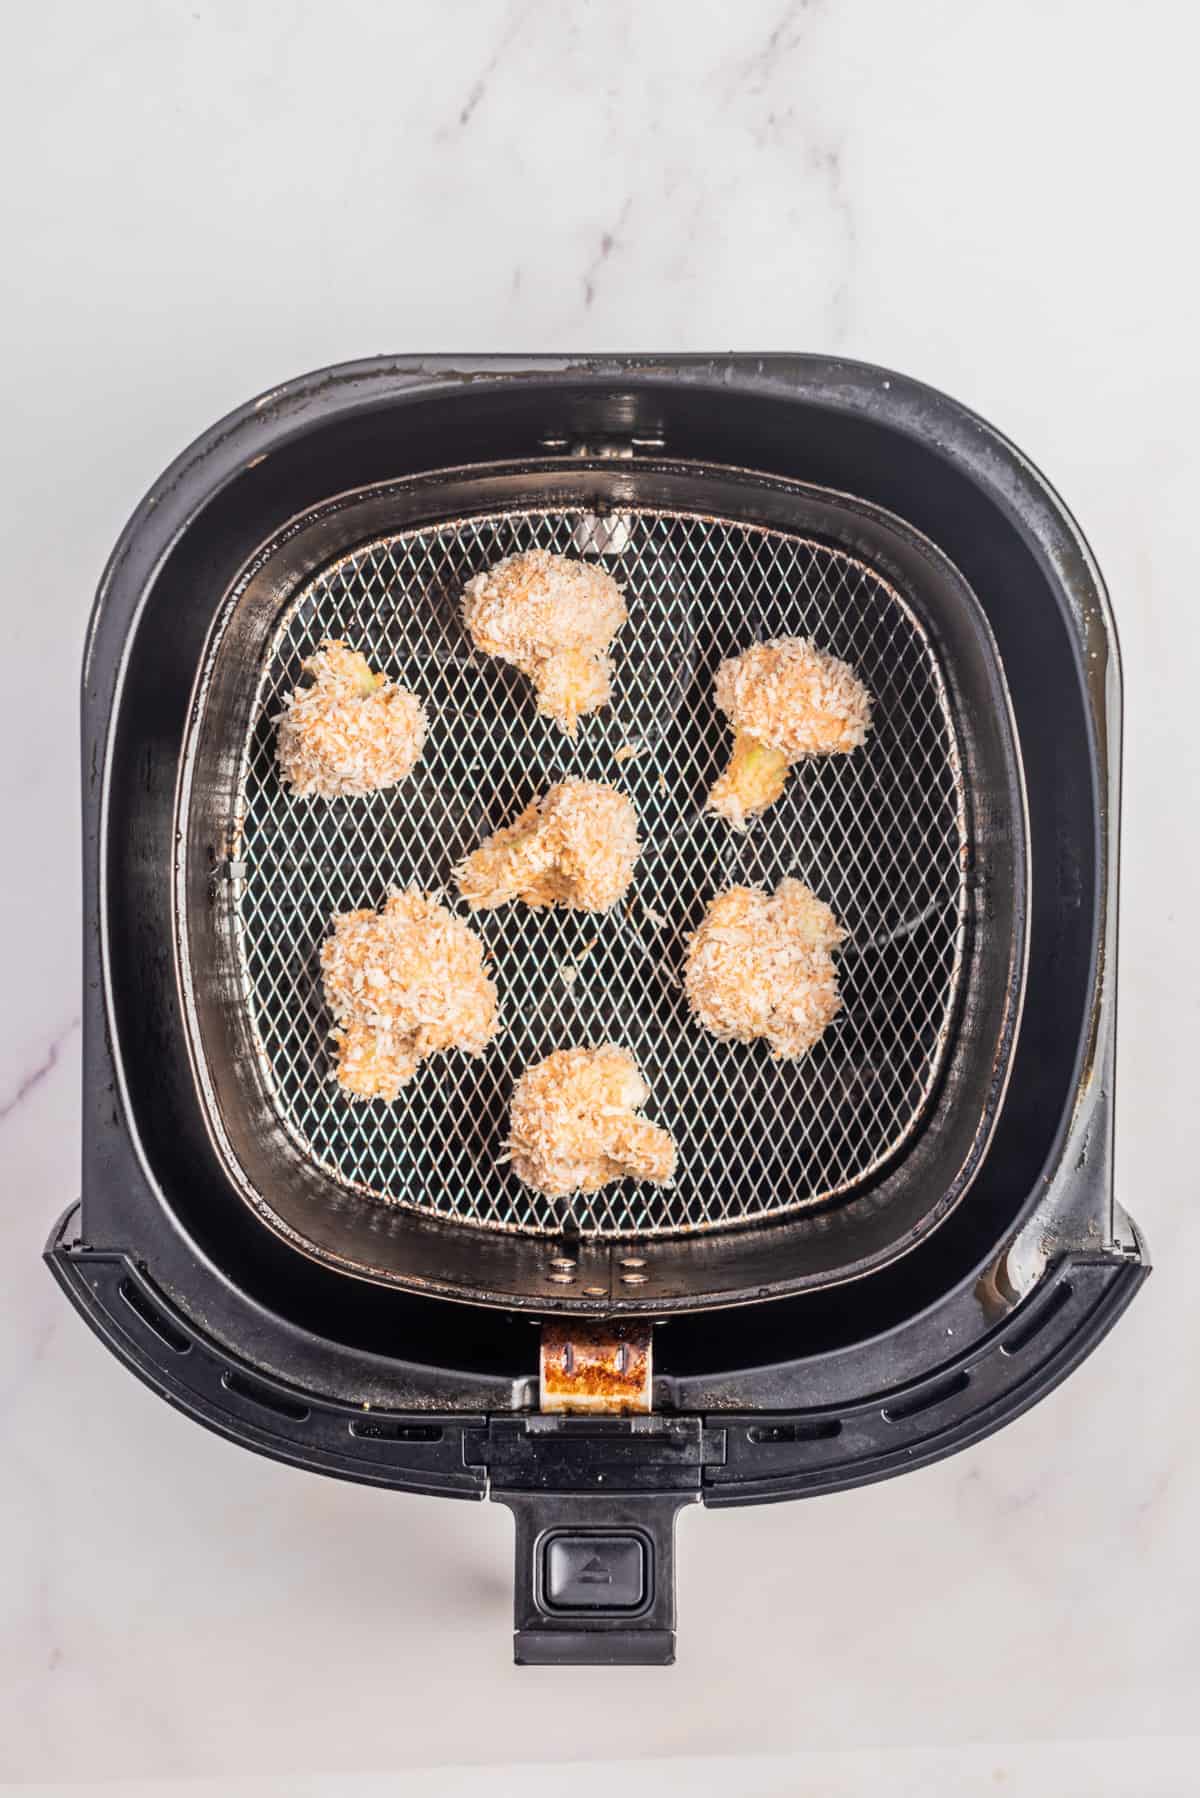 An image of cauliflower florets in an air fryer before cooking